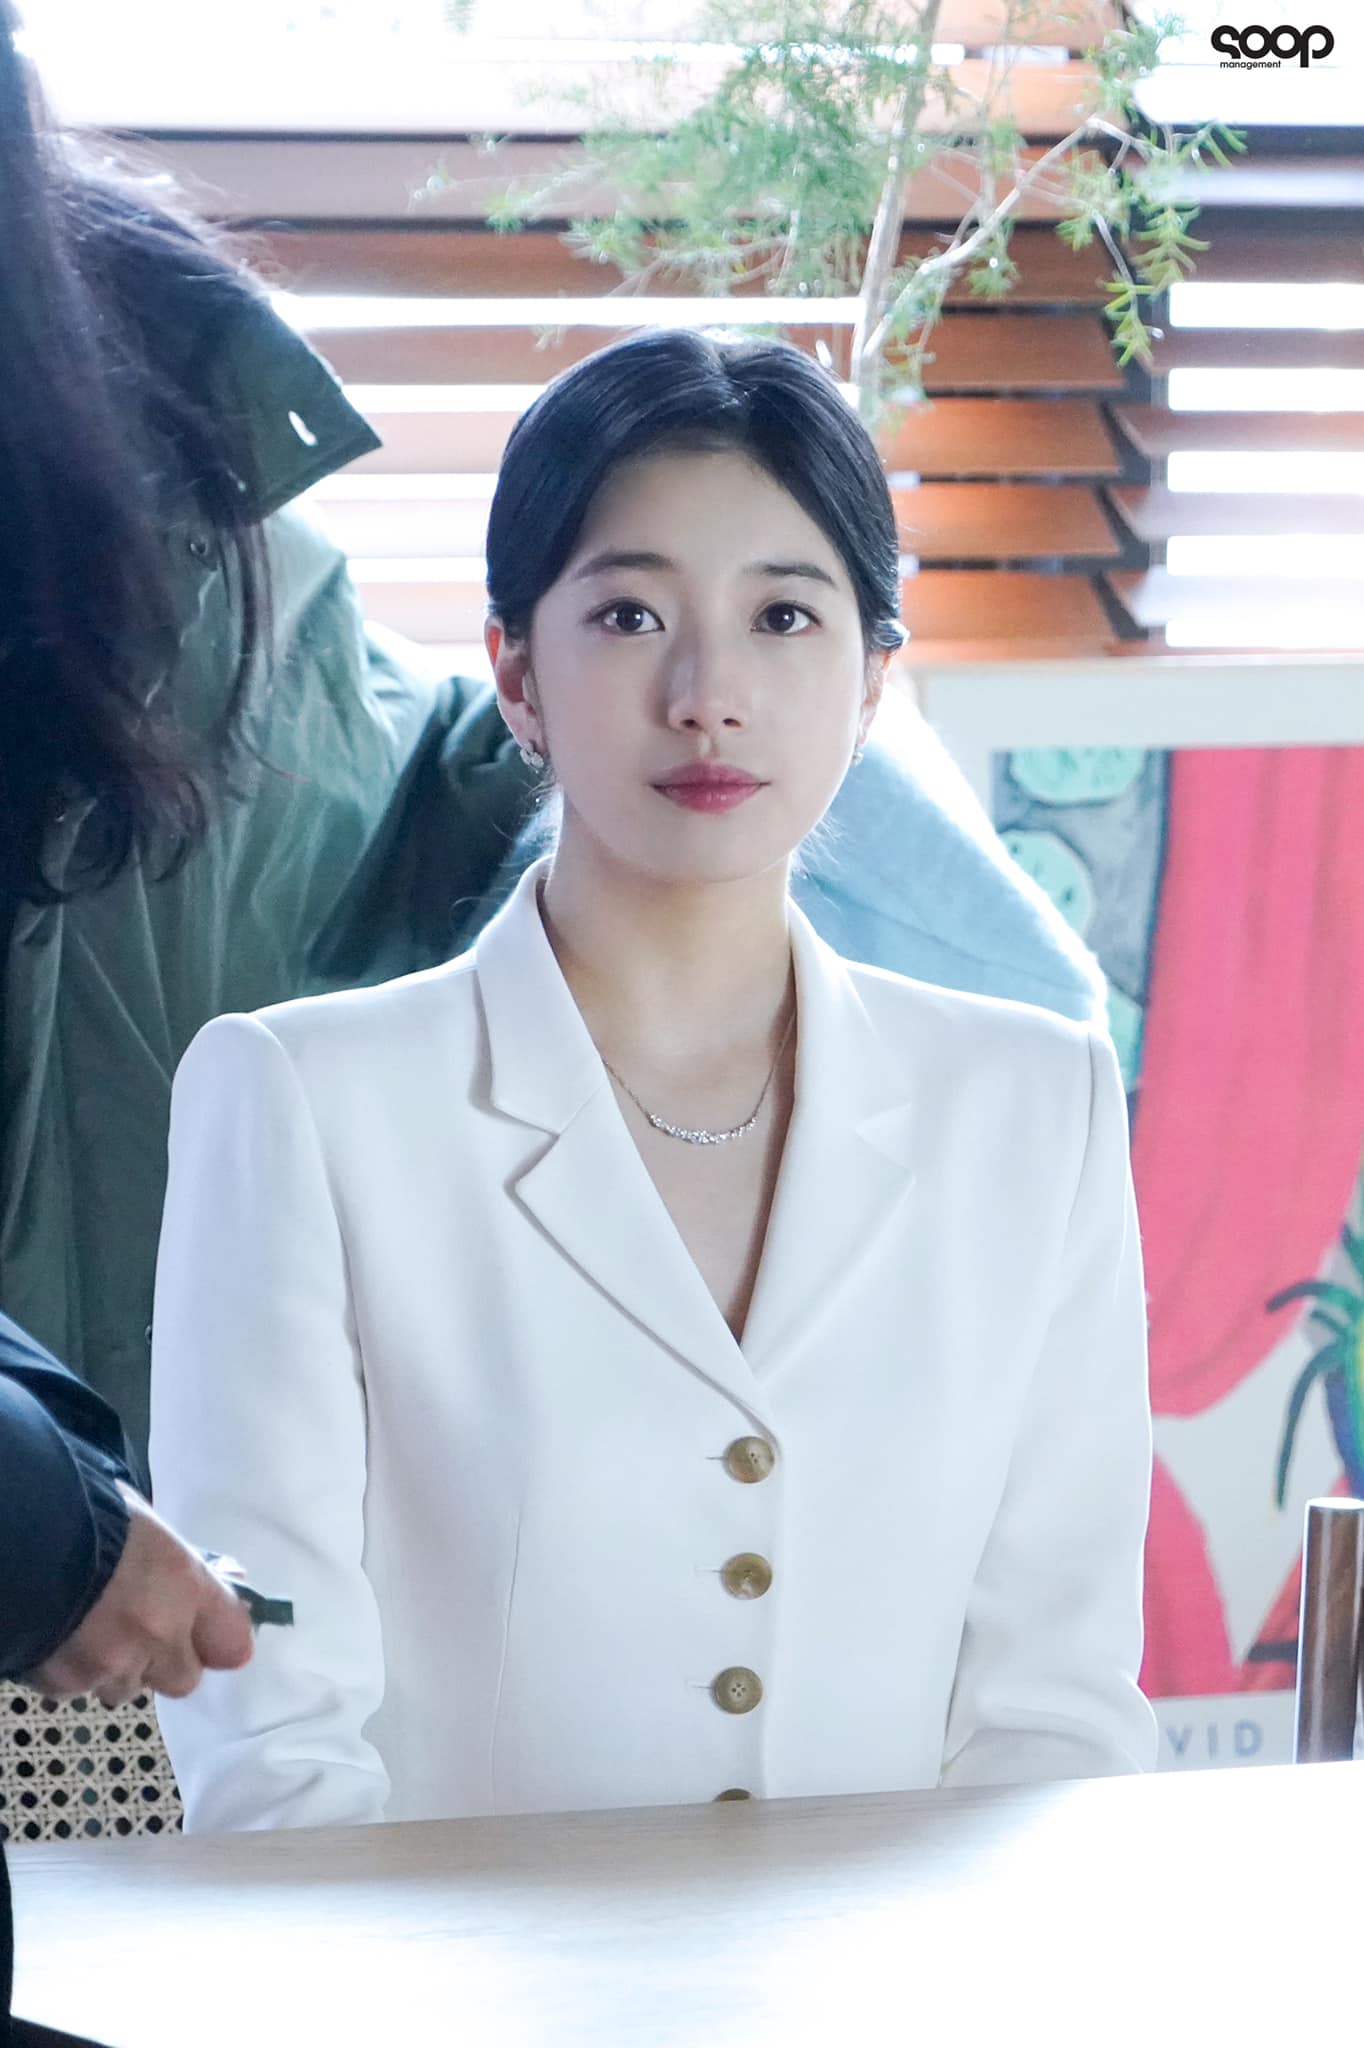 Dressed in branded clothes, Suzy is still overwhelmed by the female assistant in both charisma and style - Photo 10.